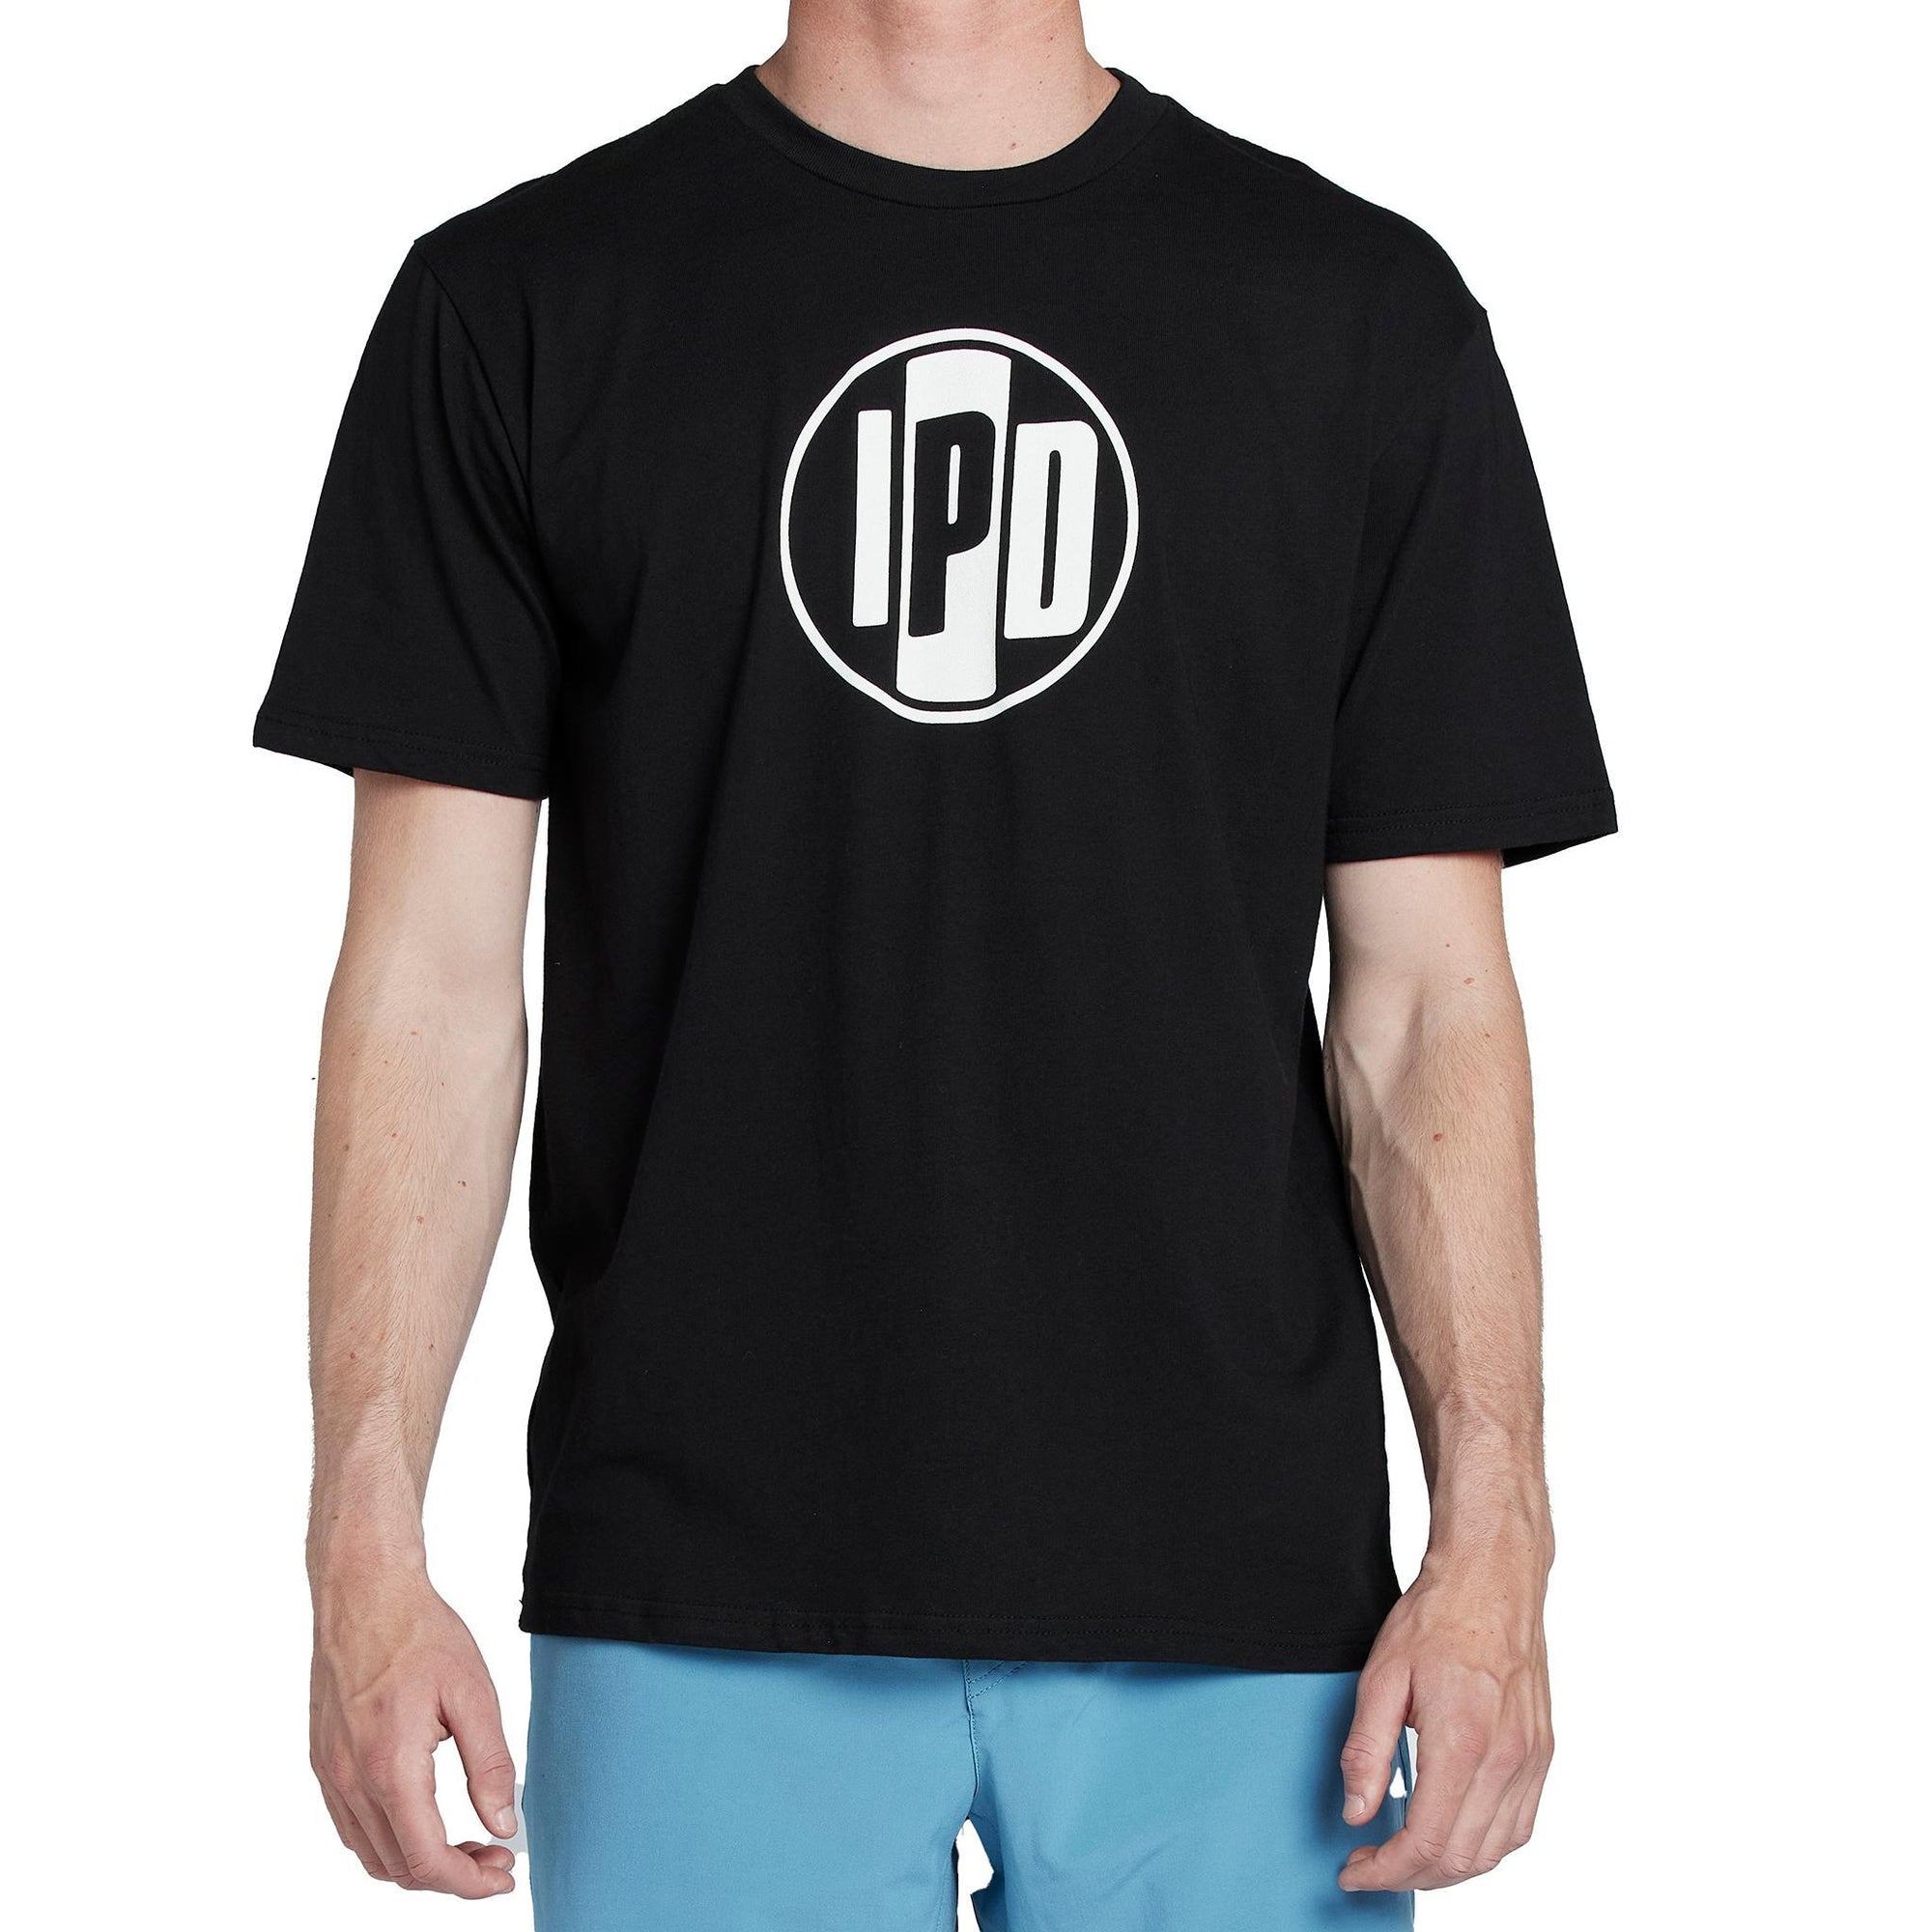 Front view of a black short sleeve tee with a large I P D logo over the center of the chest.